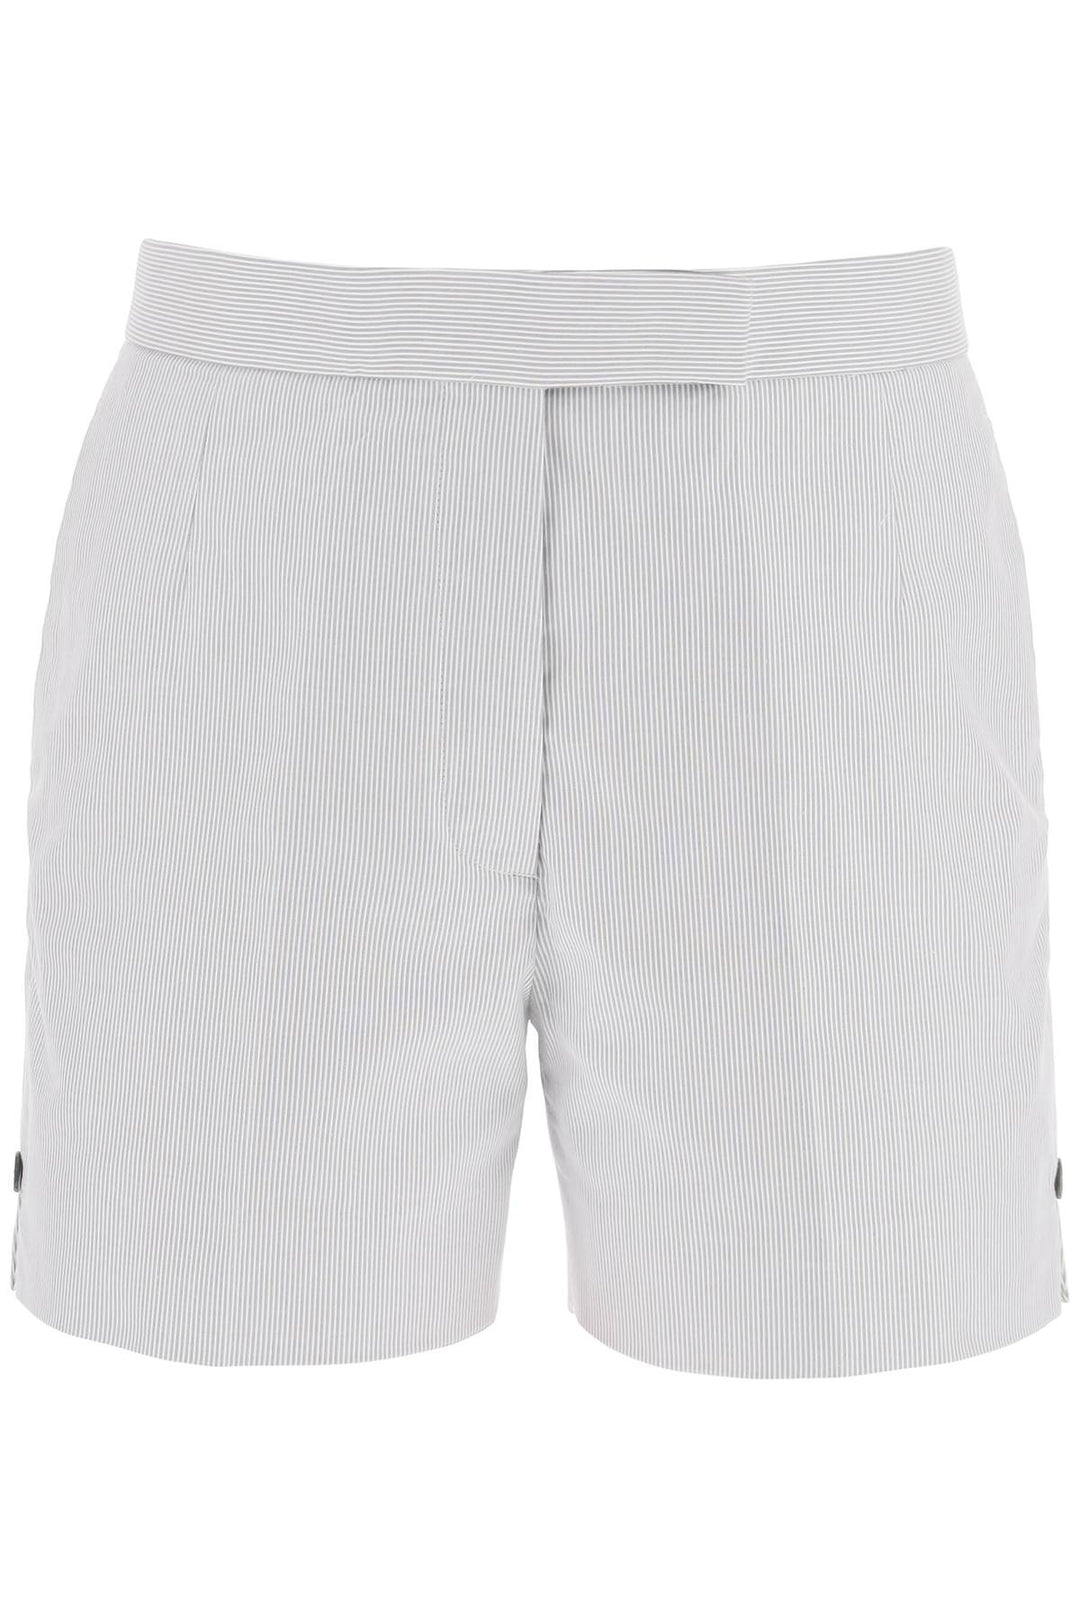 Thom Browne Shorts With Pincord Motif   Bianco